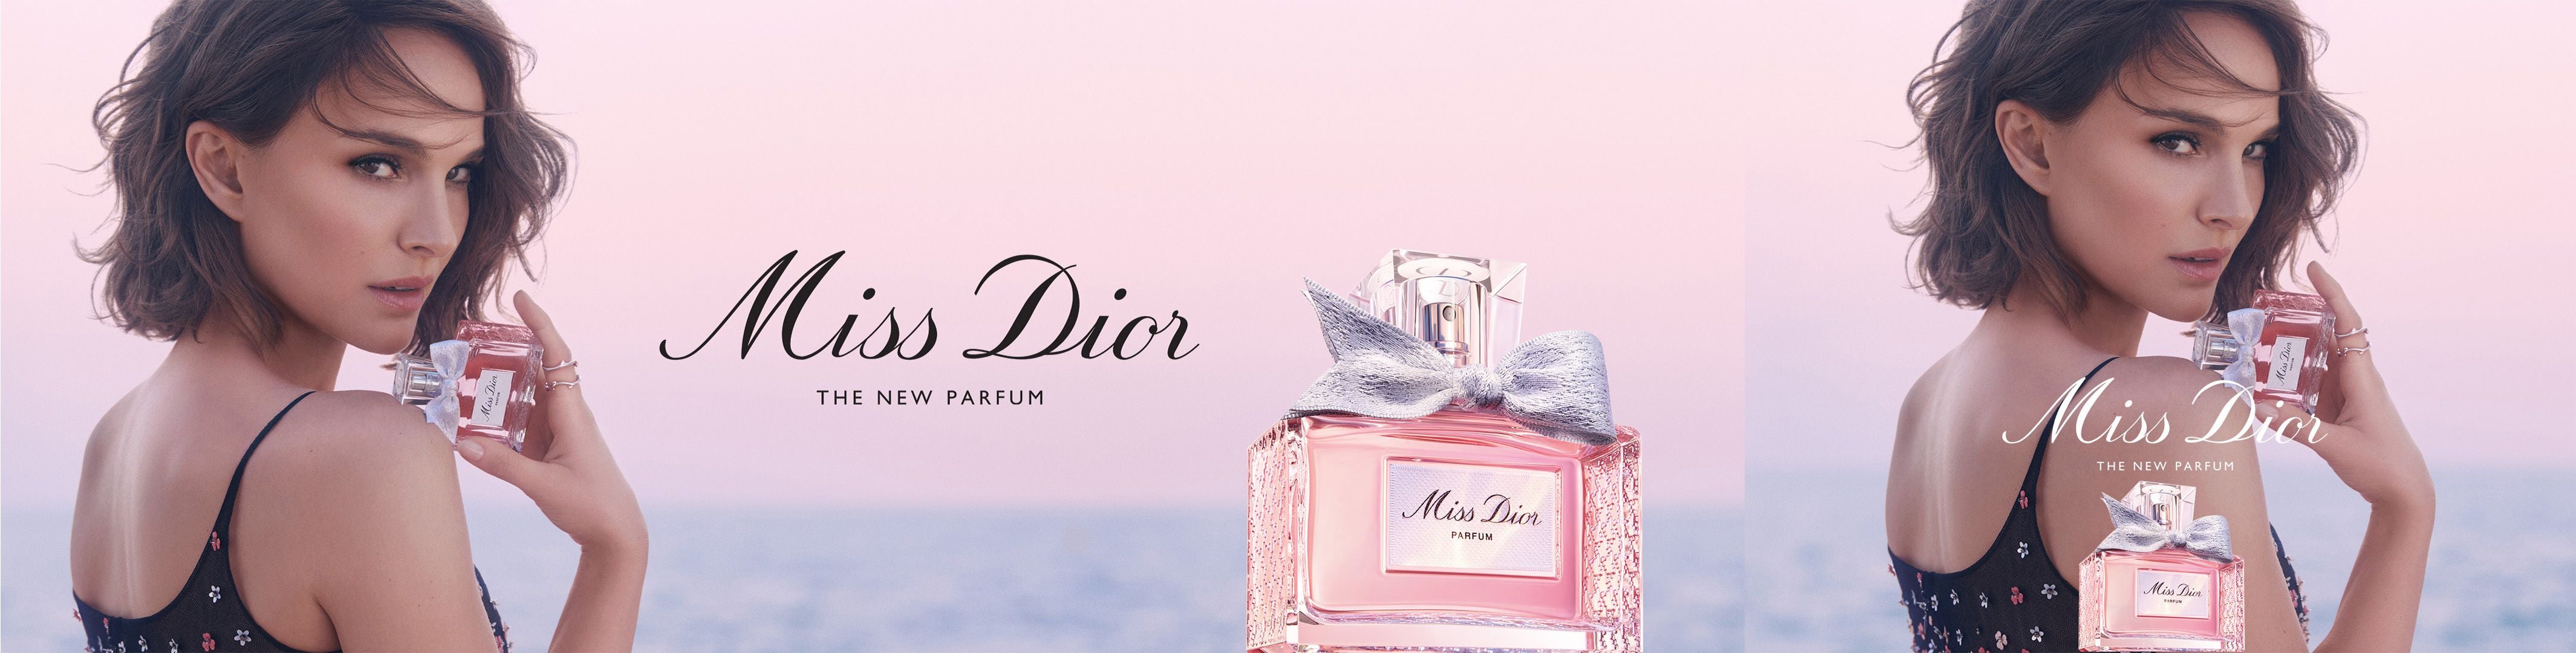 Dior Women's Fragrance | Boots